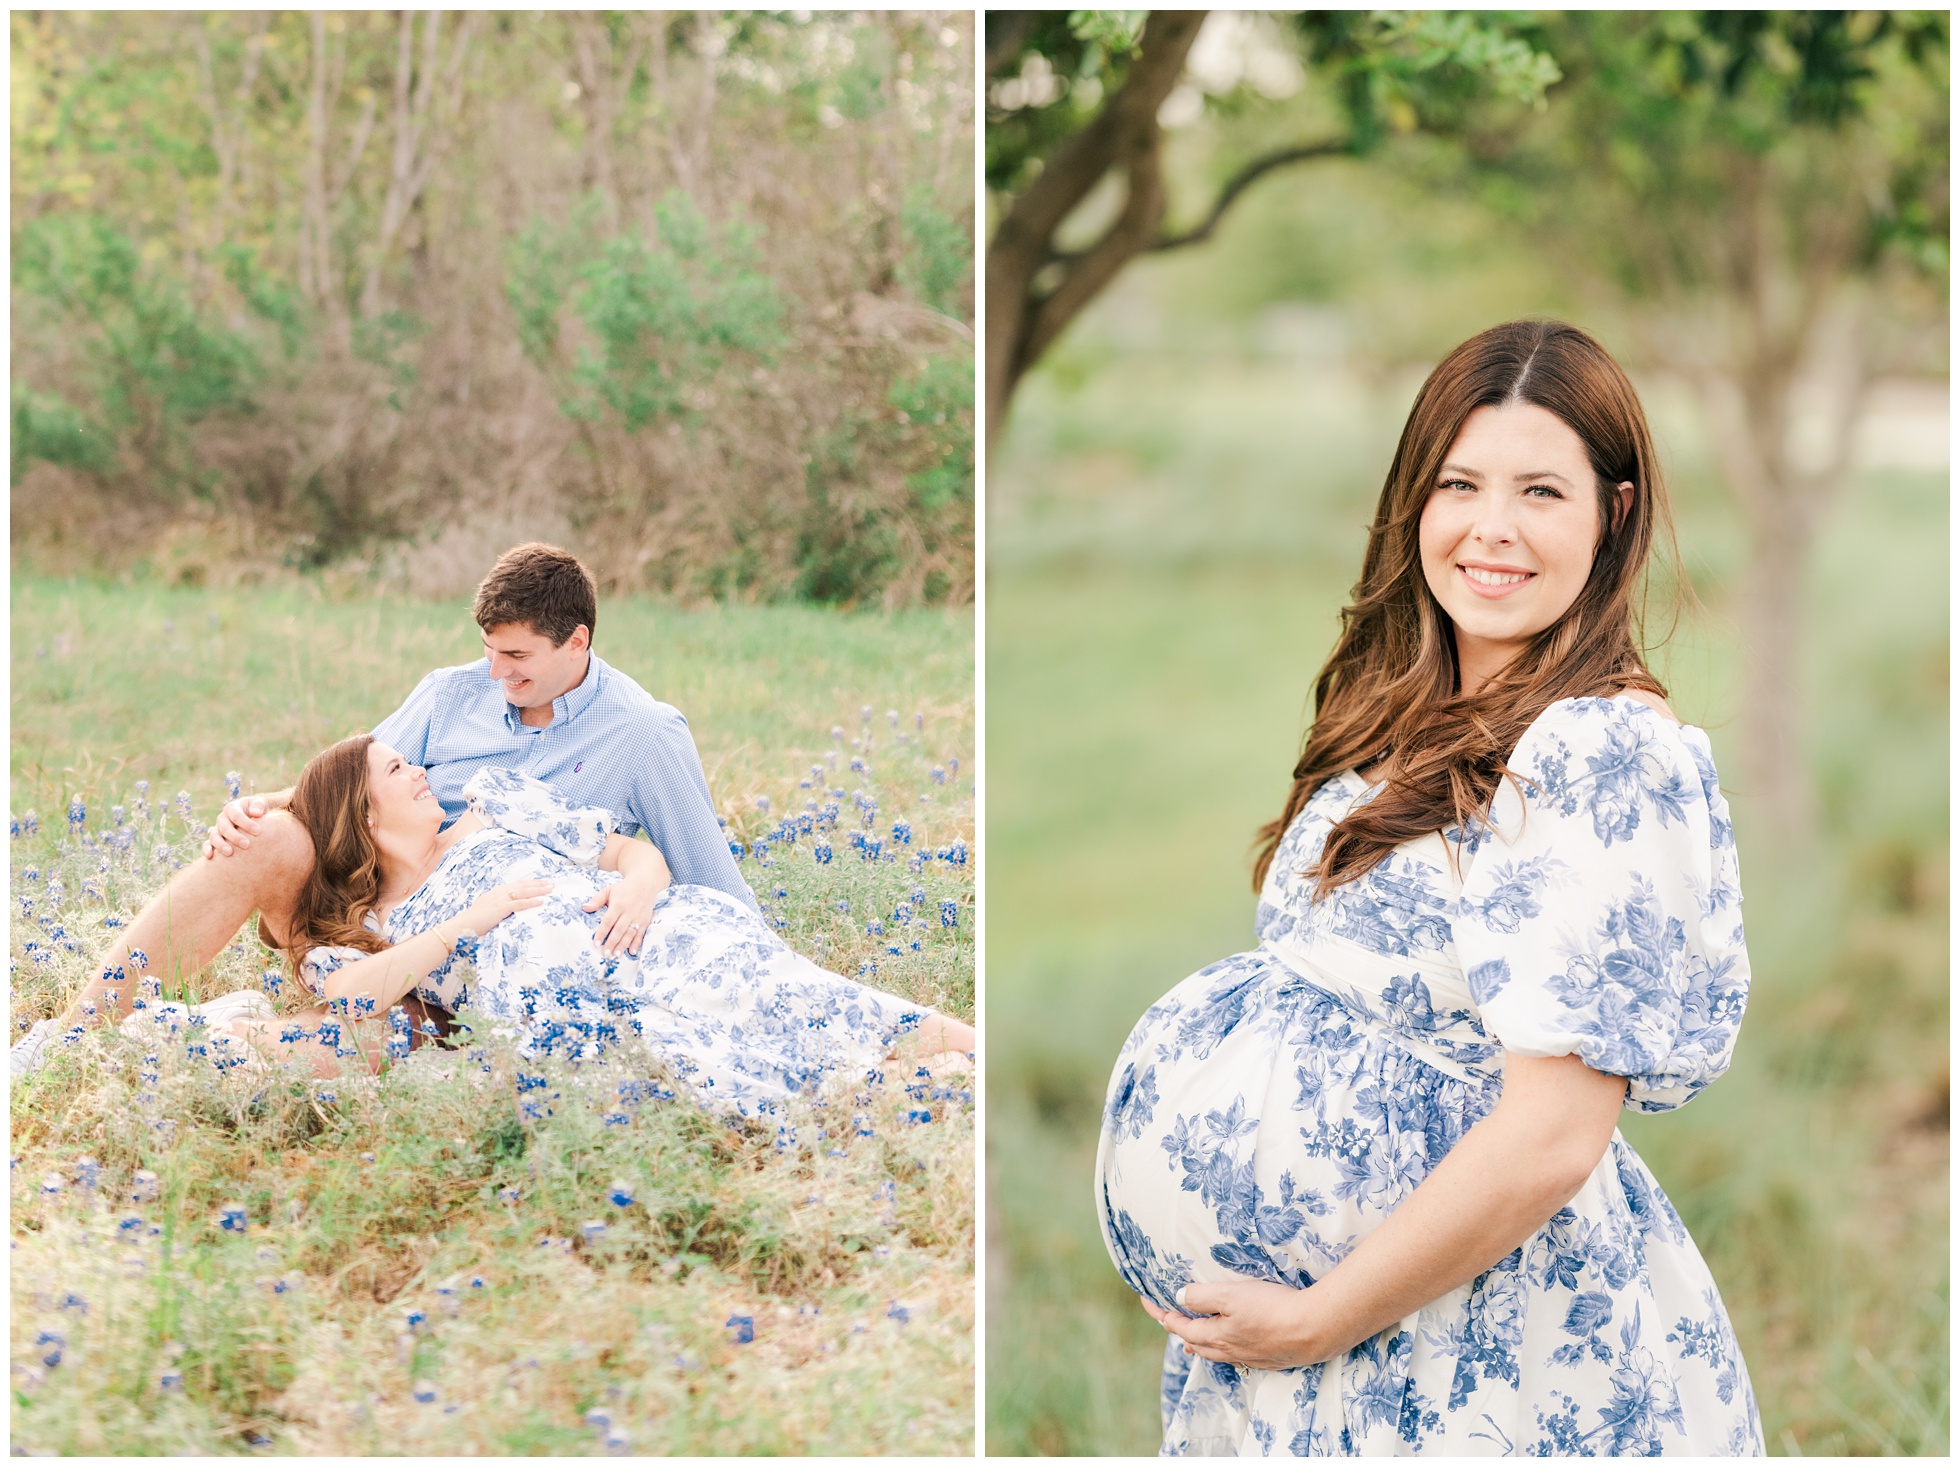 Outdoor Maternity Photography in The Woodlands, Texas.